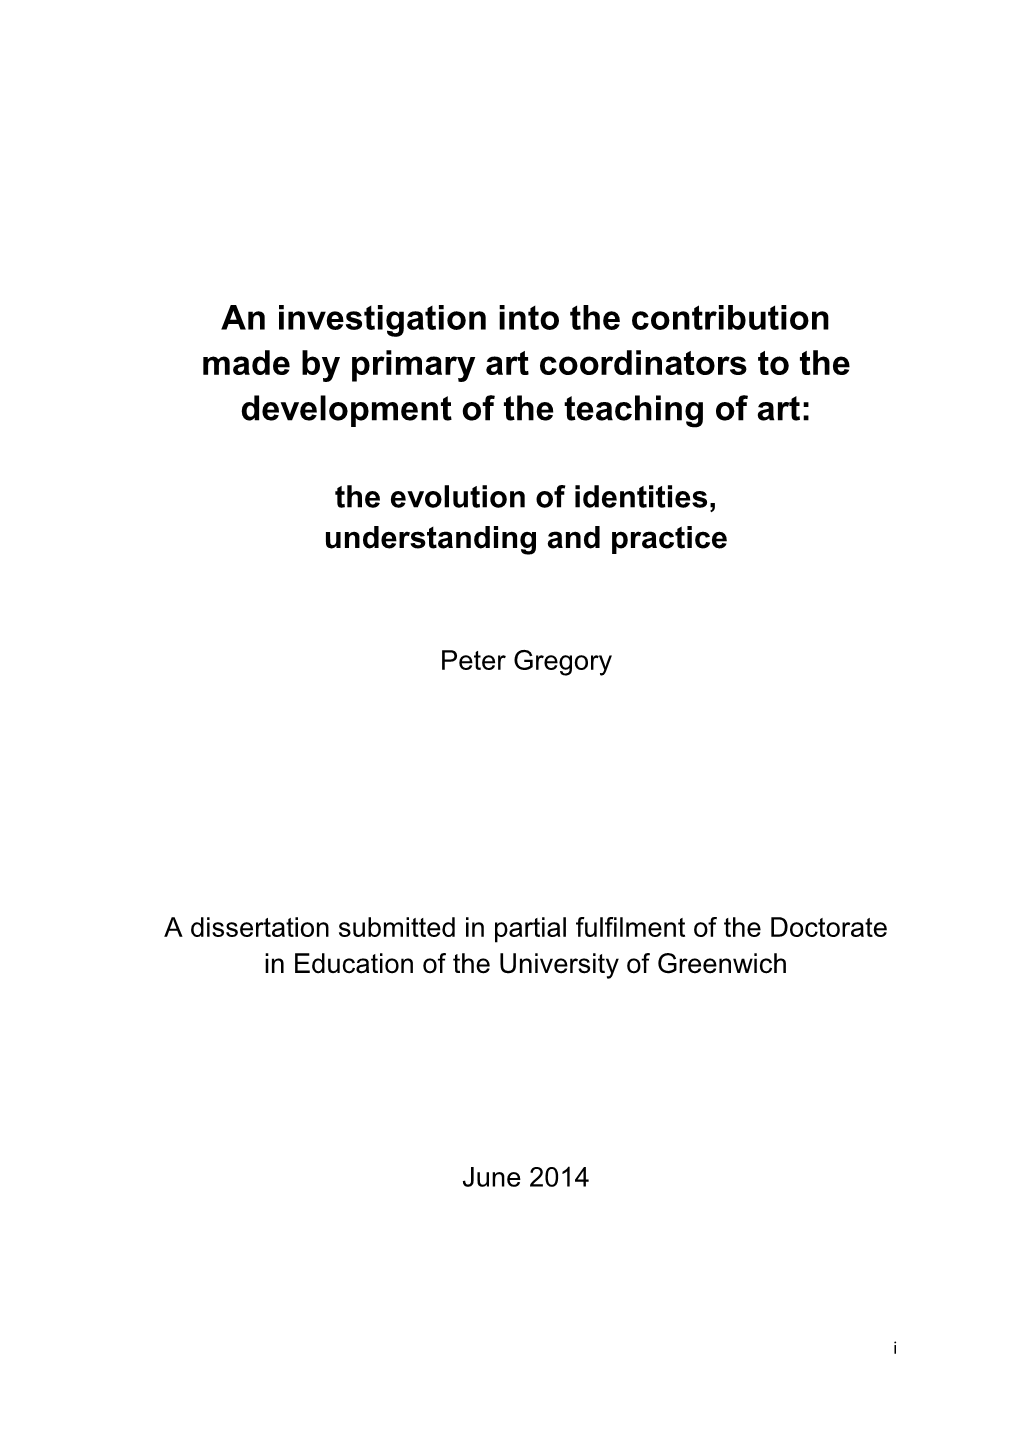 An Investigation Into the Contribution Made by Primary Art Coordinators to the Development of the Teaching of Art